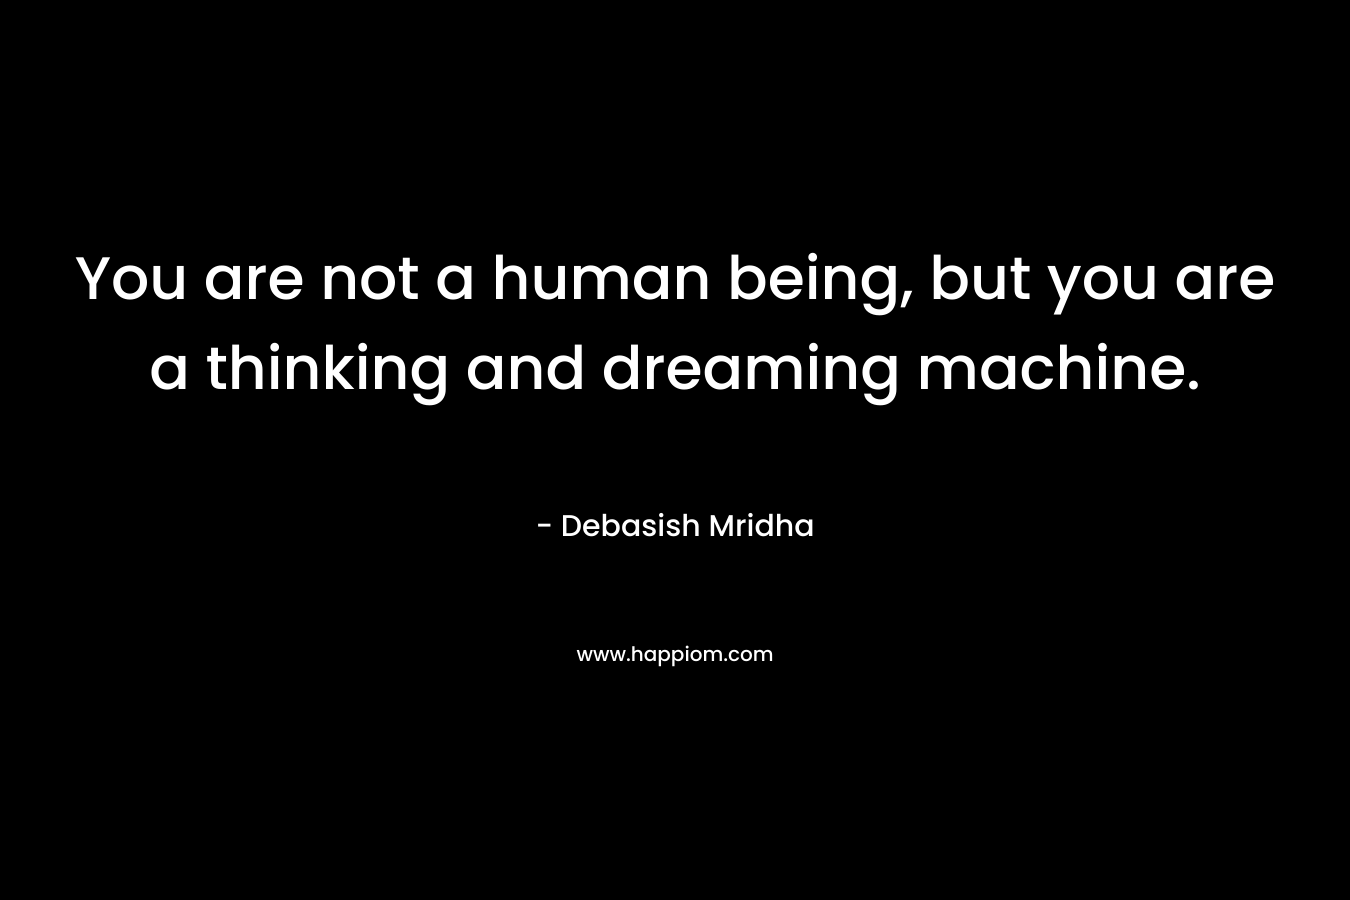 You are not a human being, but you are a thinking and dreaming machine.